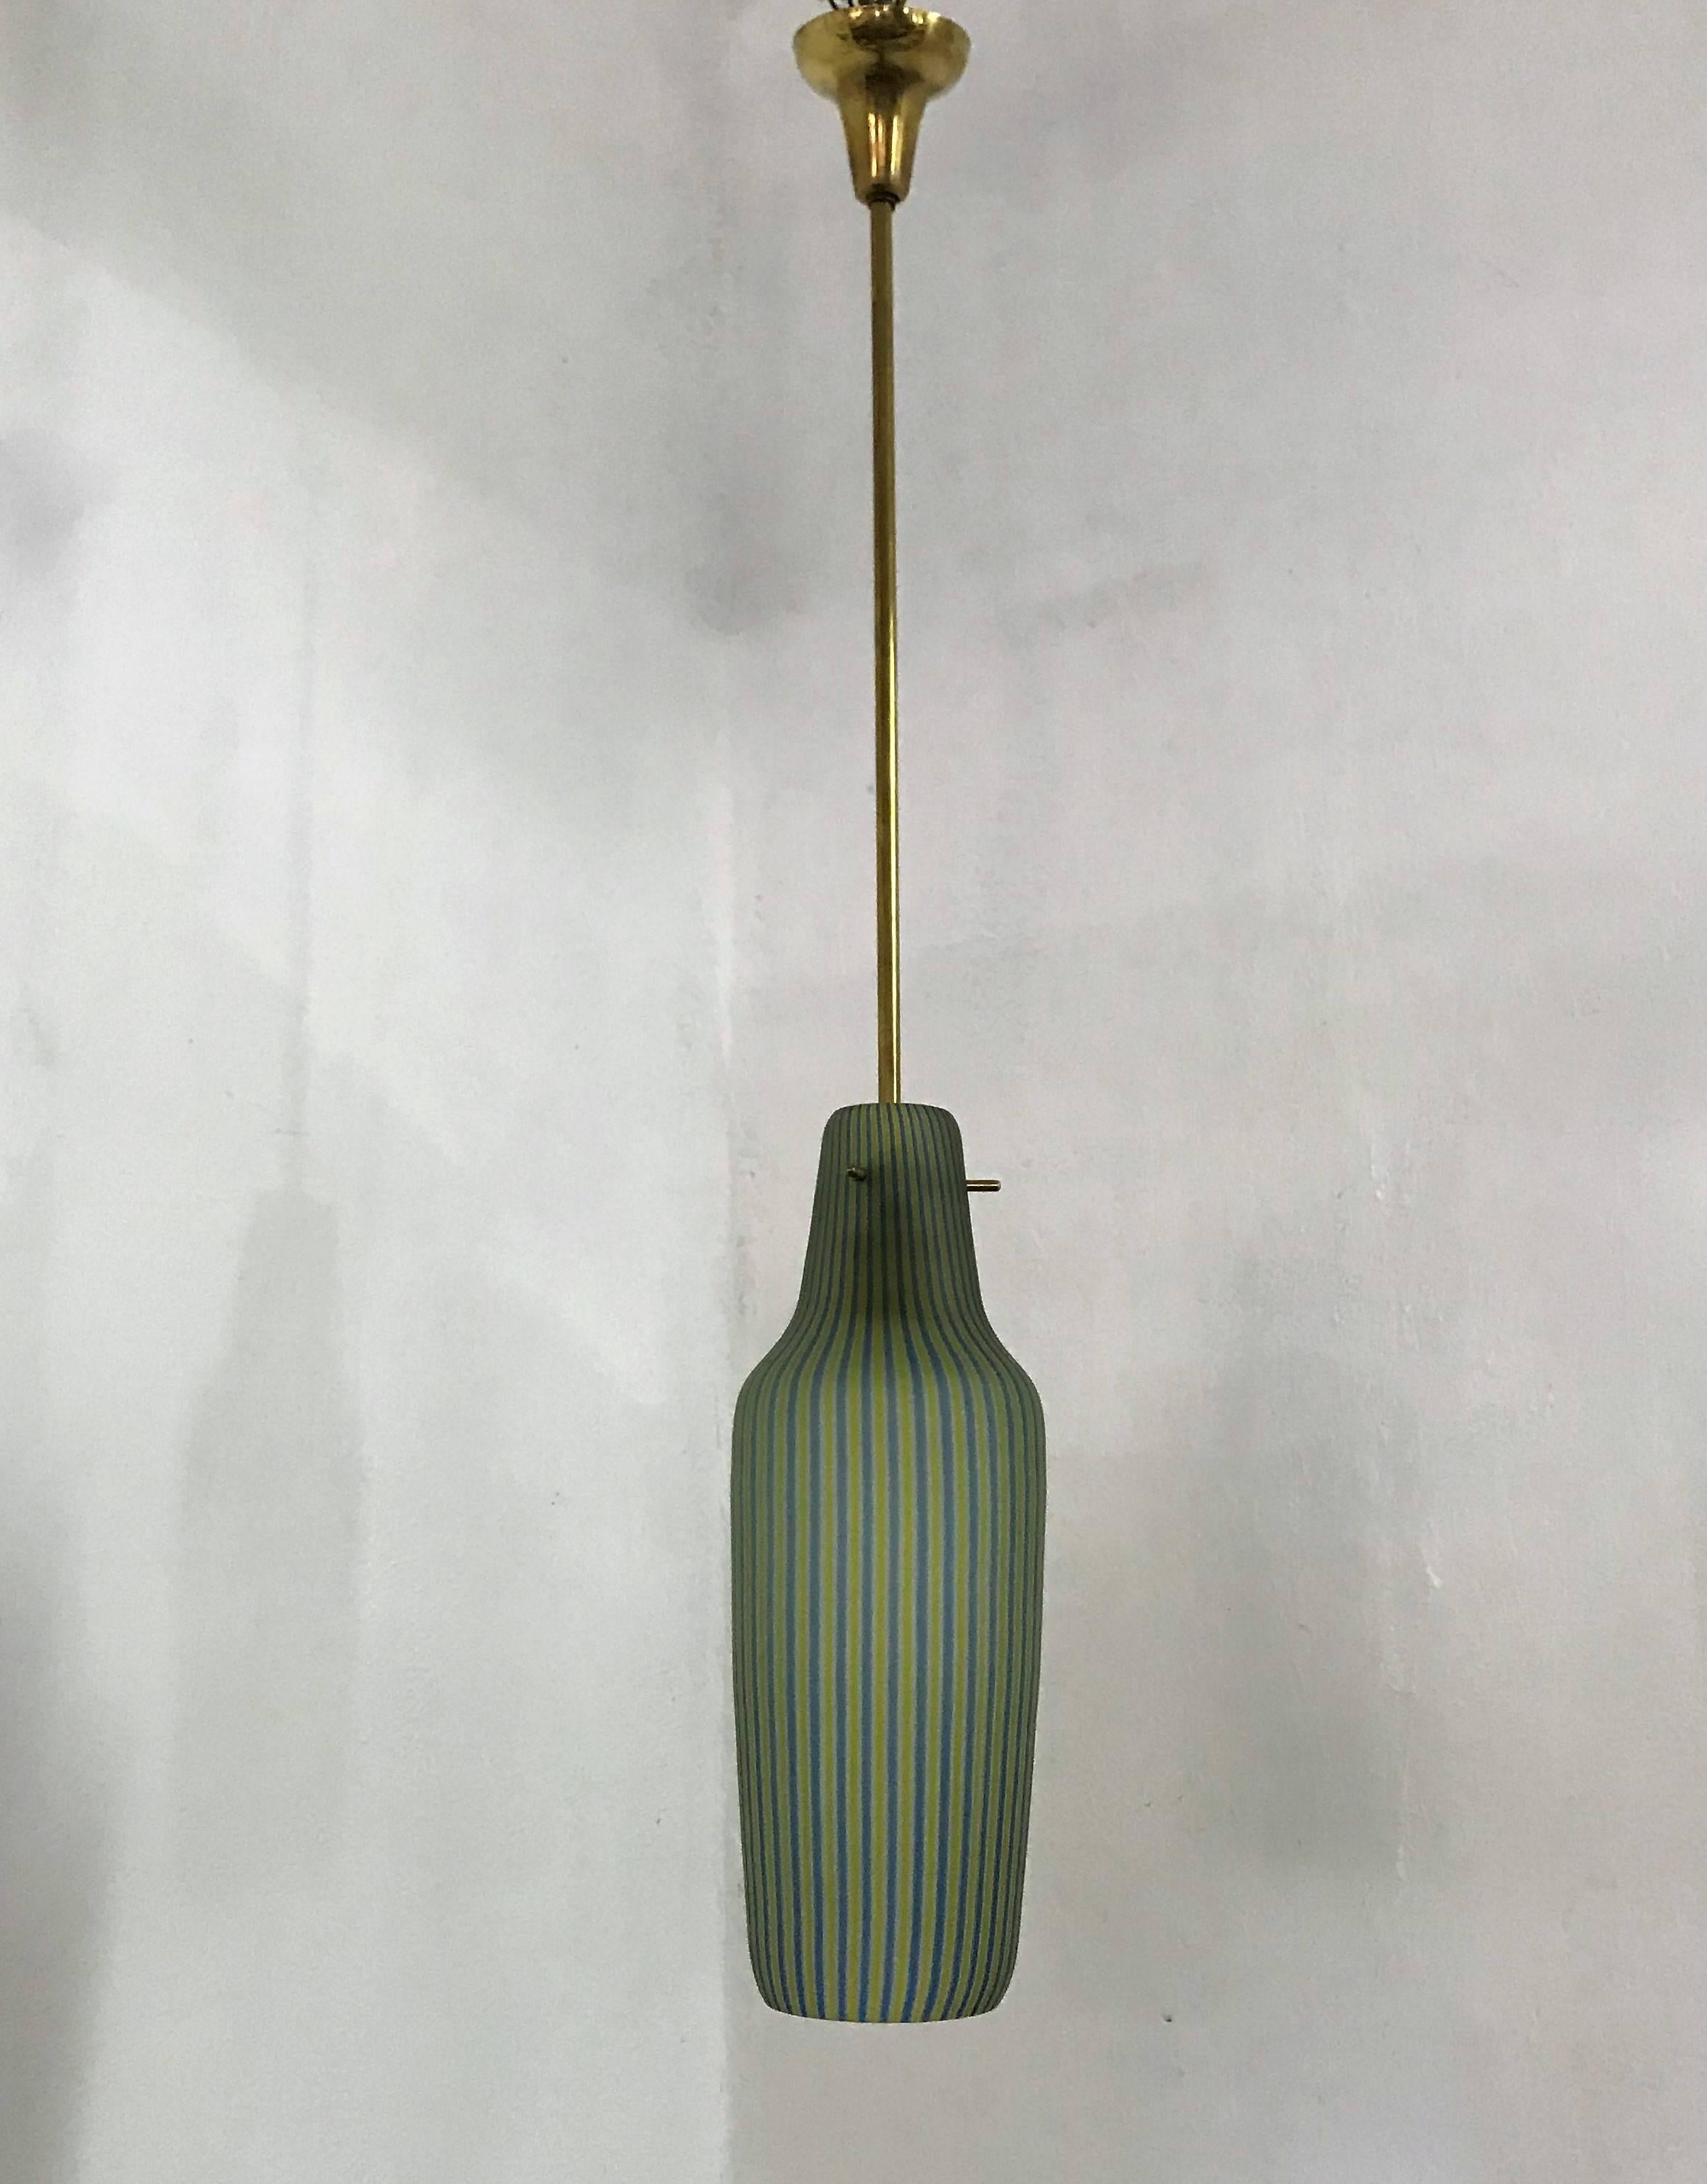 Beautiful Mid-Century Modern pendant light in murano glass in the style of Massimo Vignelli, possibly made by Aureliano Toso, circa 1960's  

Measurements:
Total height 32. 5 inches
Glass shade 13.5 inches high by 5